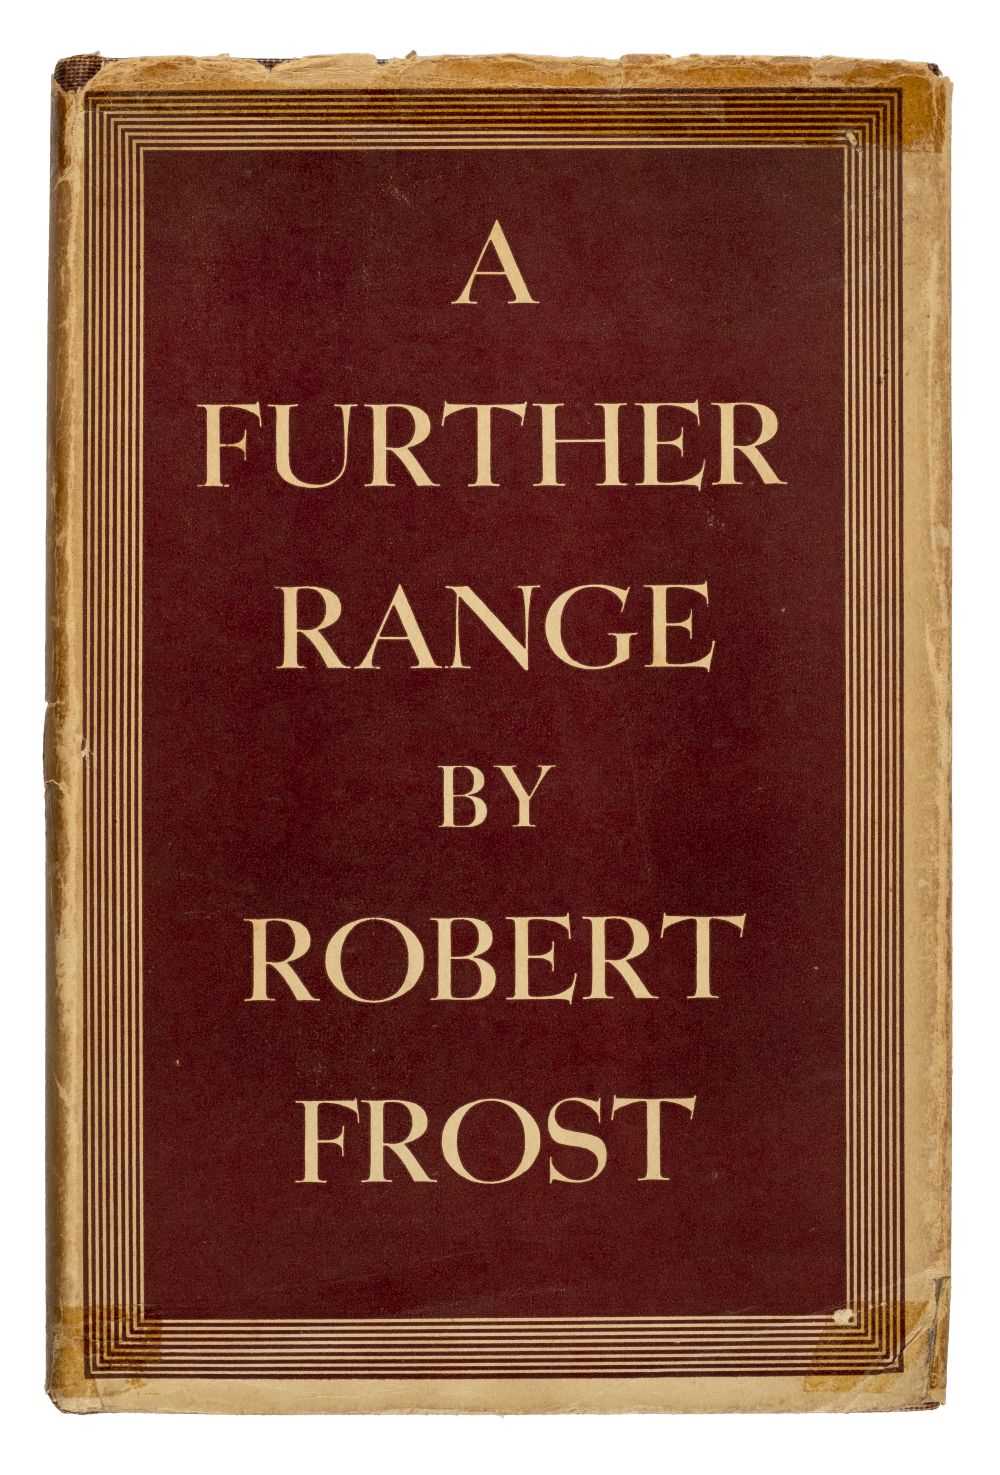 Lot 817 - Frost (Robert). A Further Range, 1st edition, [1936]